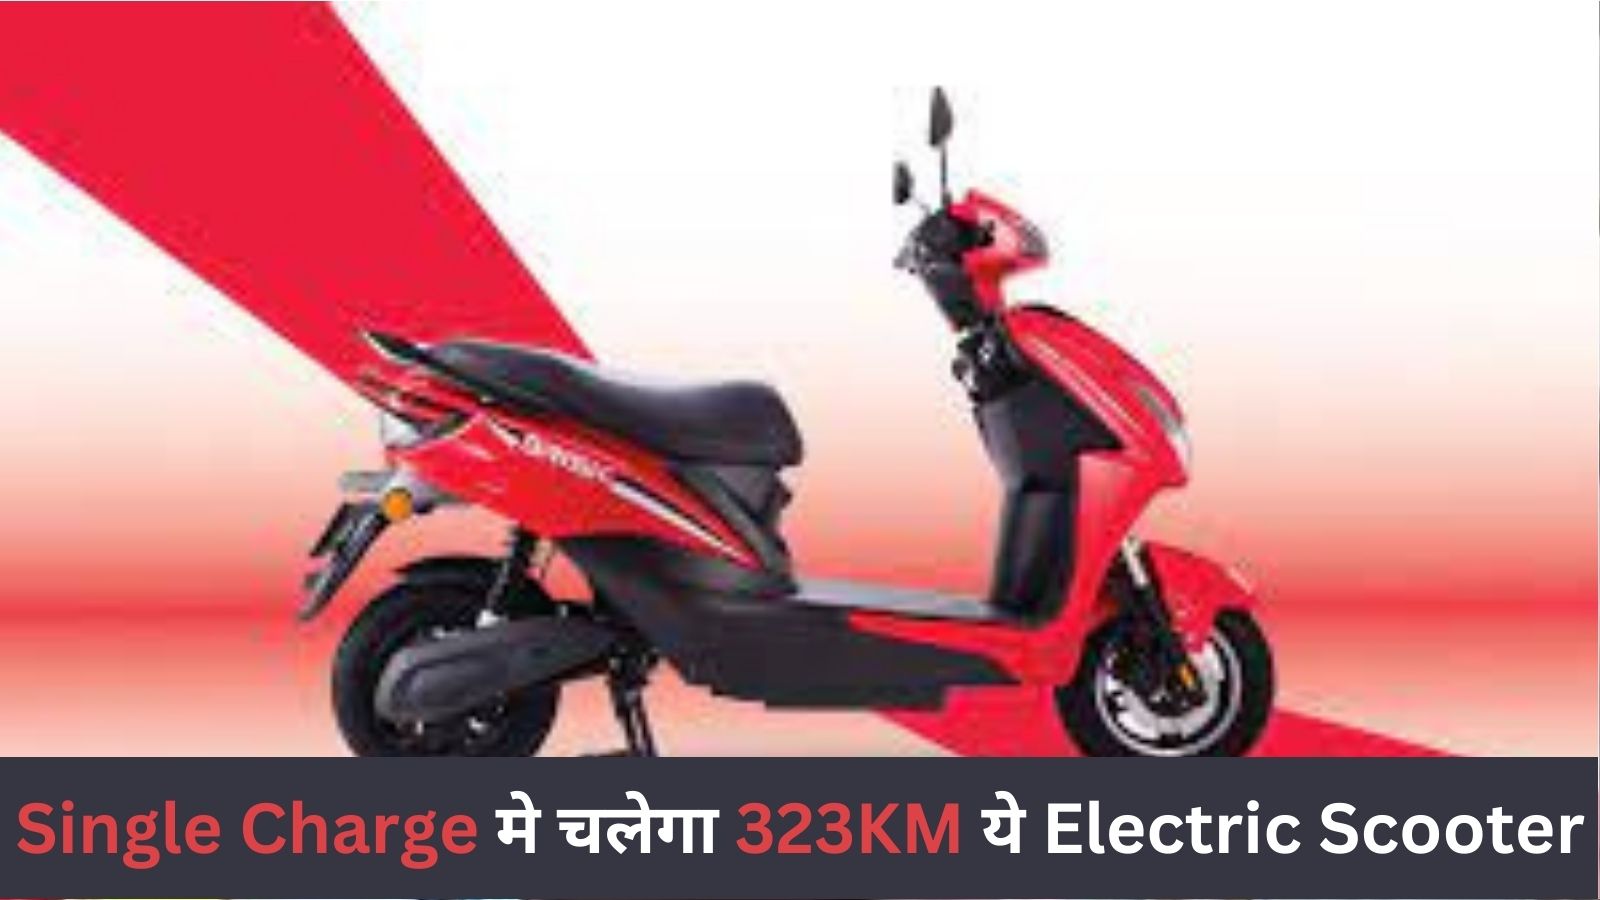 This Electric Scooter will run 323KM in Single Charge